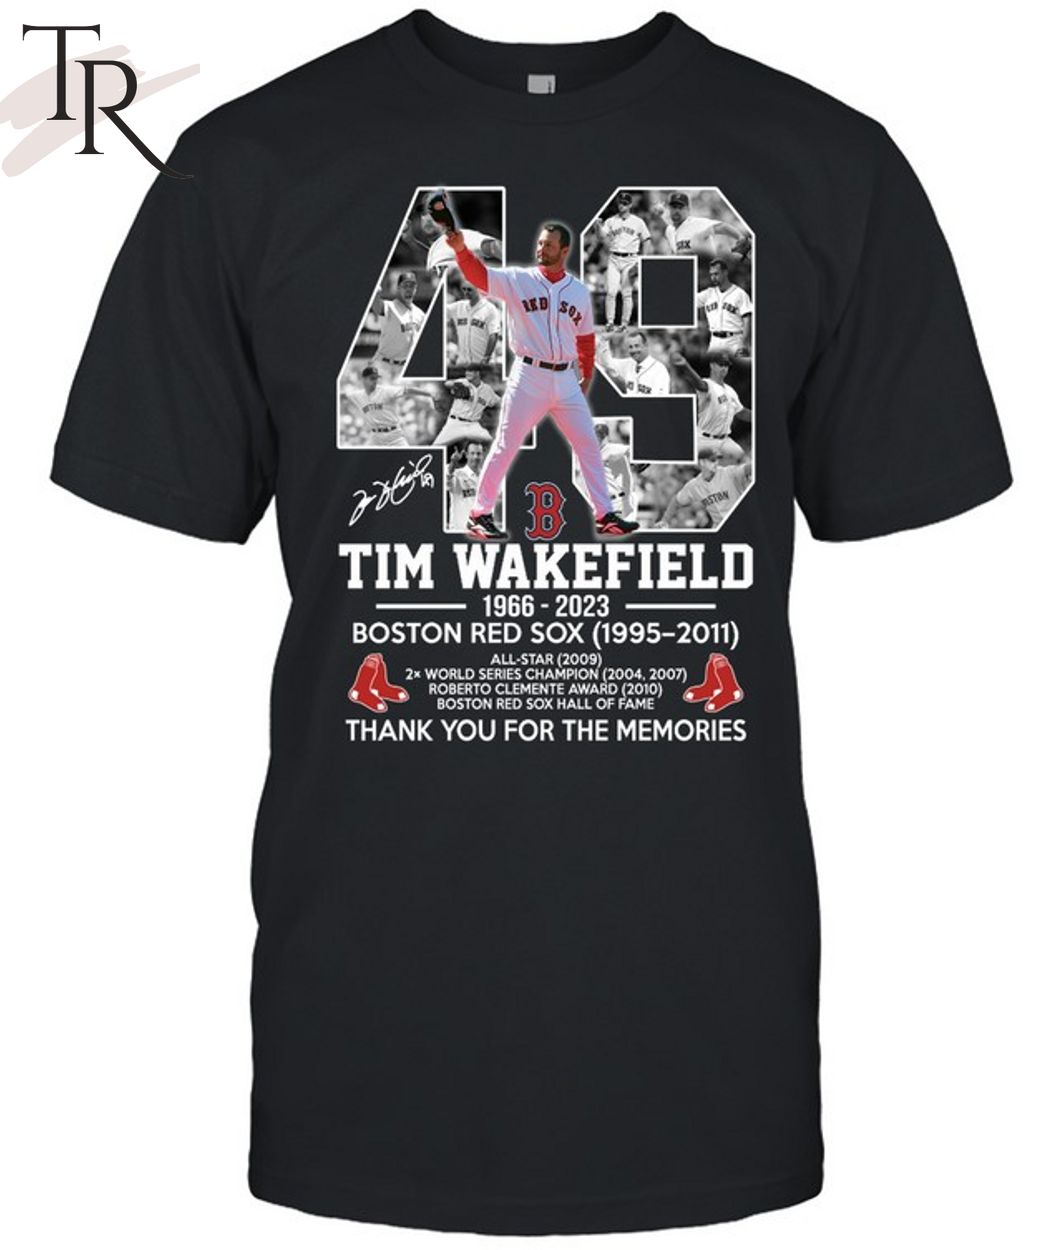 49 Tim Wakefield 1966 - 2023 Boston Red Sox 1995 - 2011 Thank You